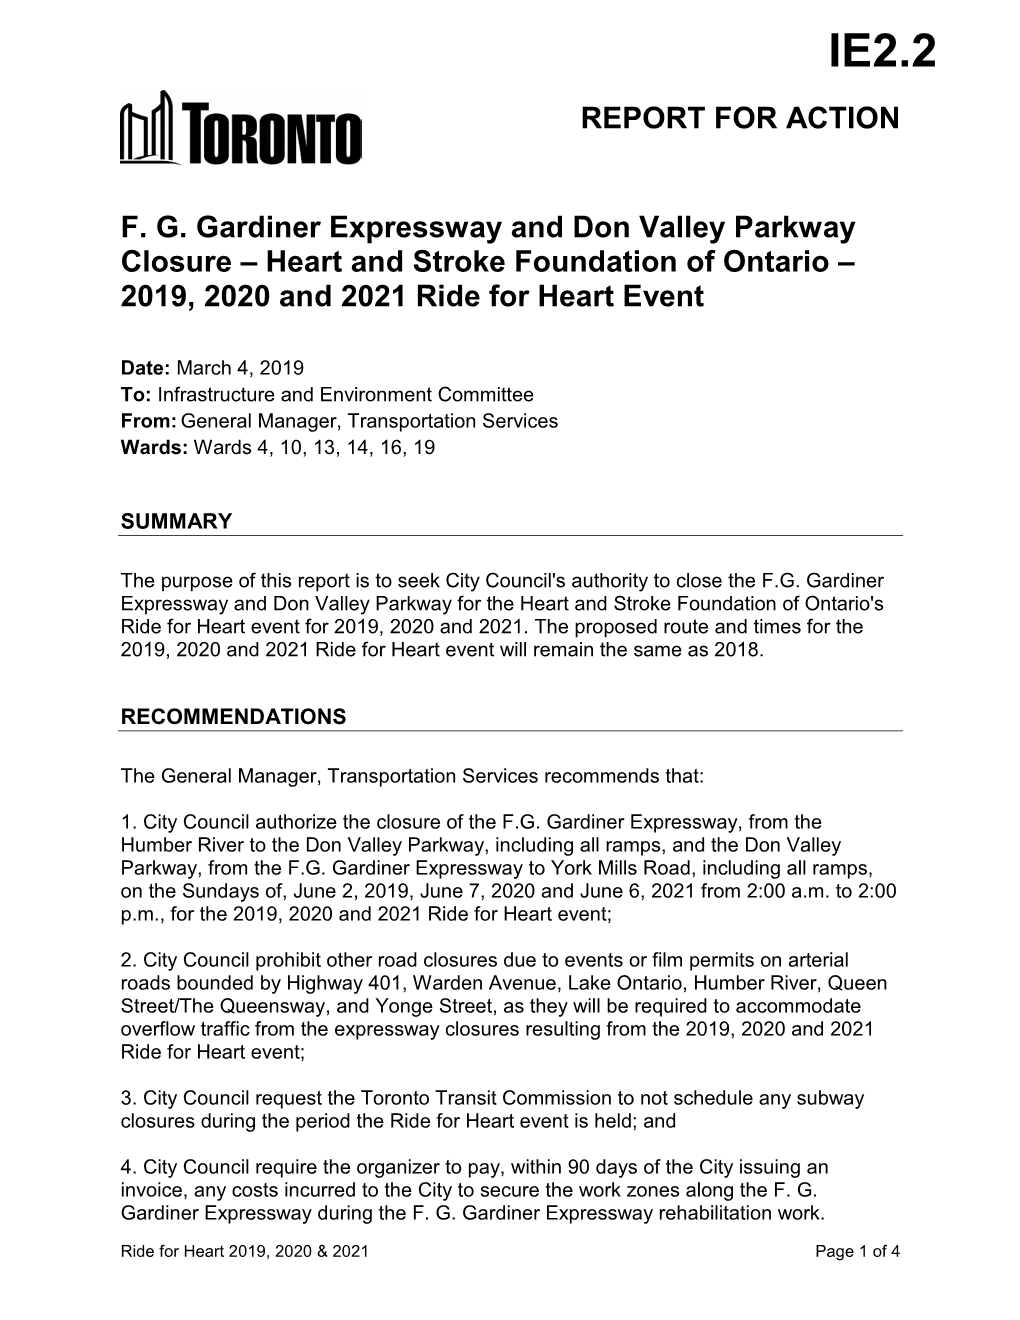 F. G. Gardiner Expressway and Don Valley Parkway Closure – Heart and Stroke Foundation of Ontario – 2019, 2020 and 2021 Ride for Heart Event